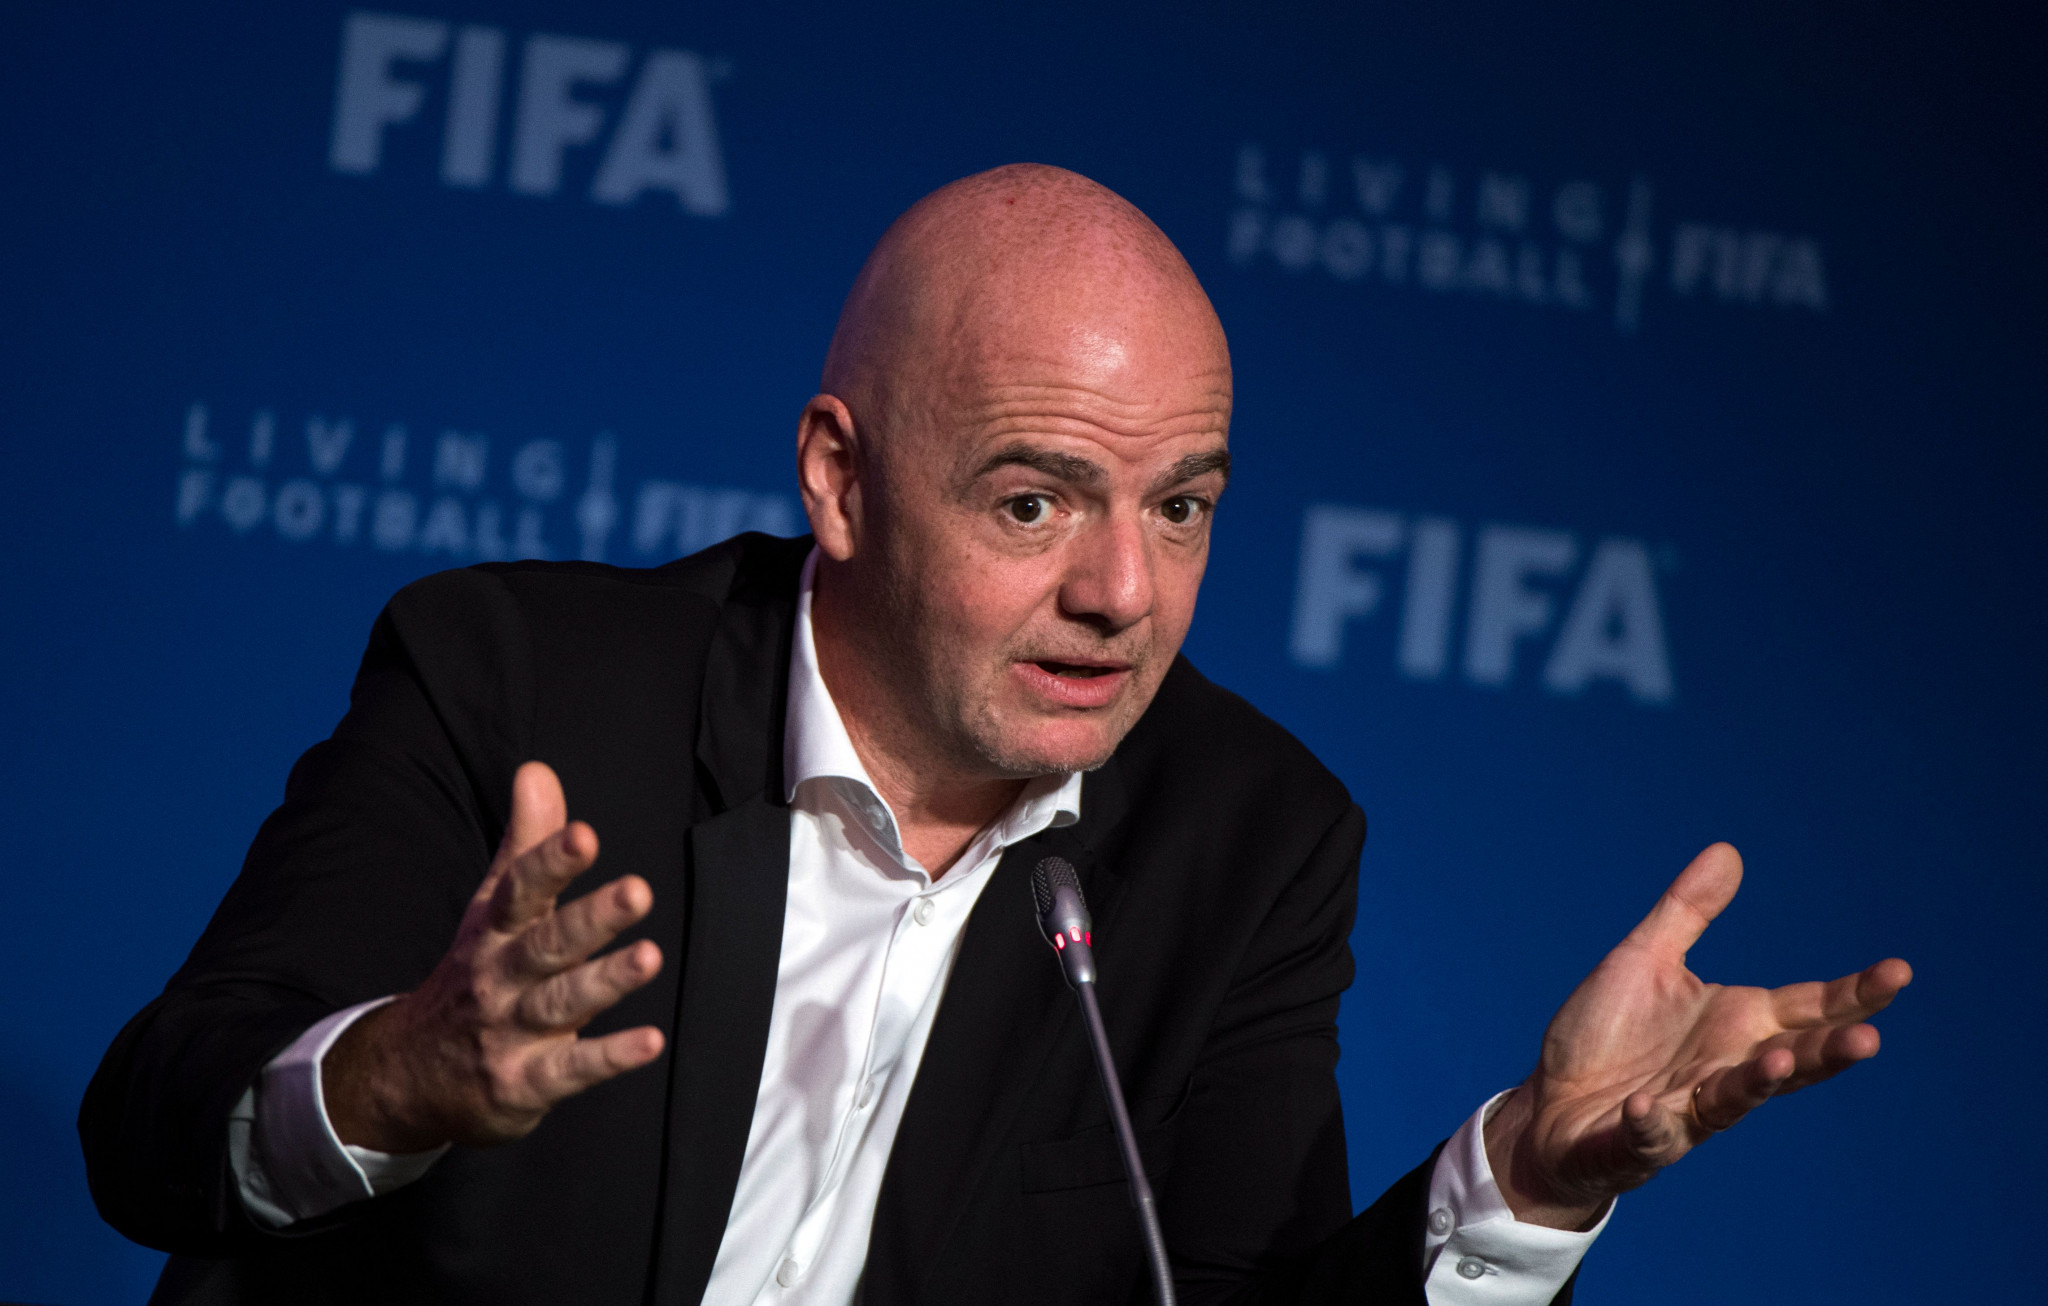 FIFA President Gianni Infantino has claimed that most football associations support expanding the 2022 World Cup in Qatar from 32 teams to 48 ©Getty Images